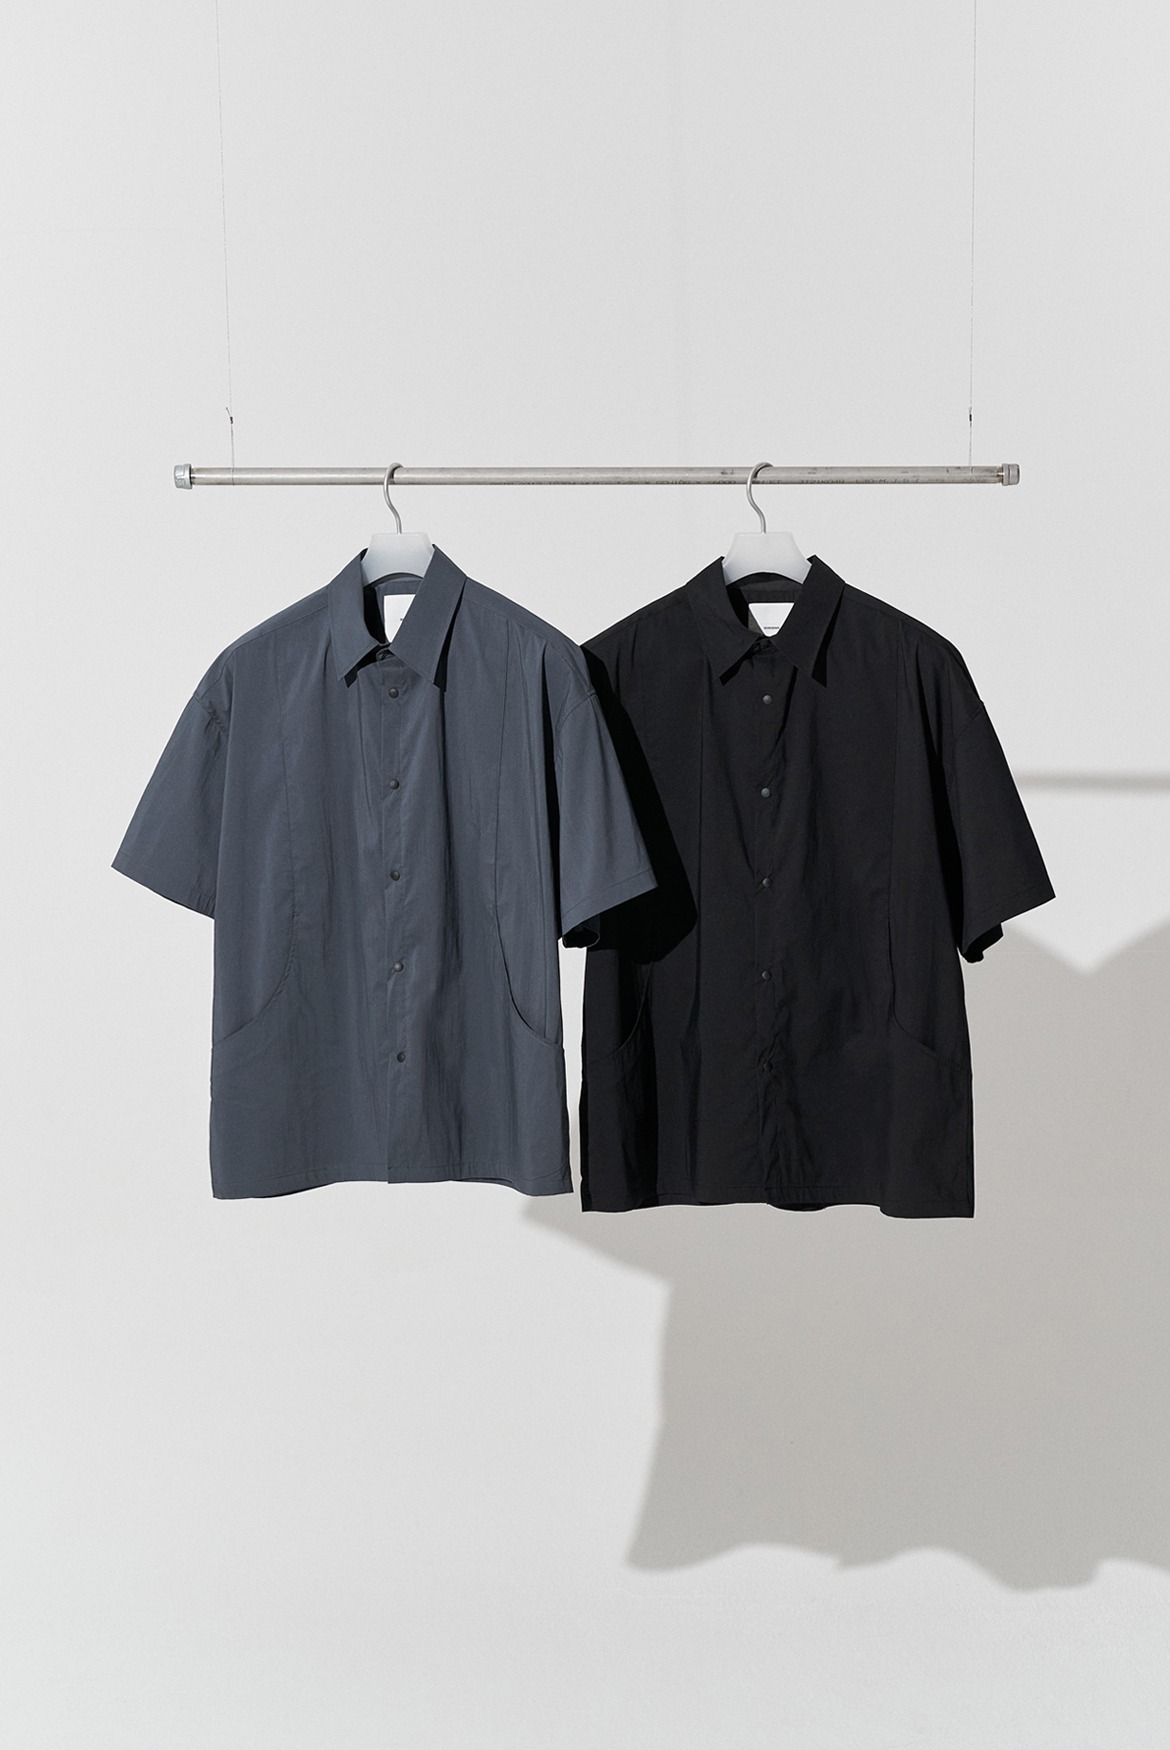 Nylon Curved Shirts [2 Colors]